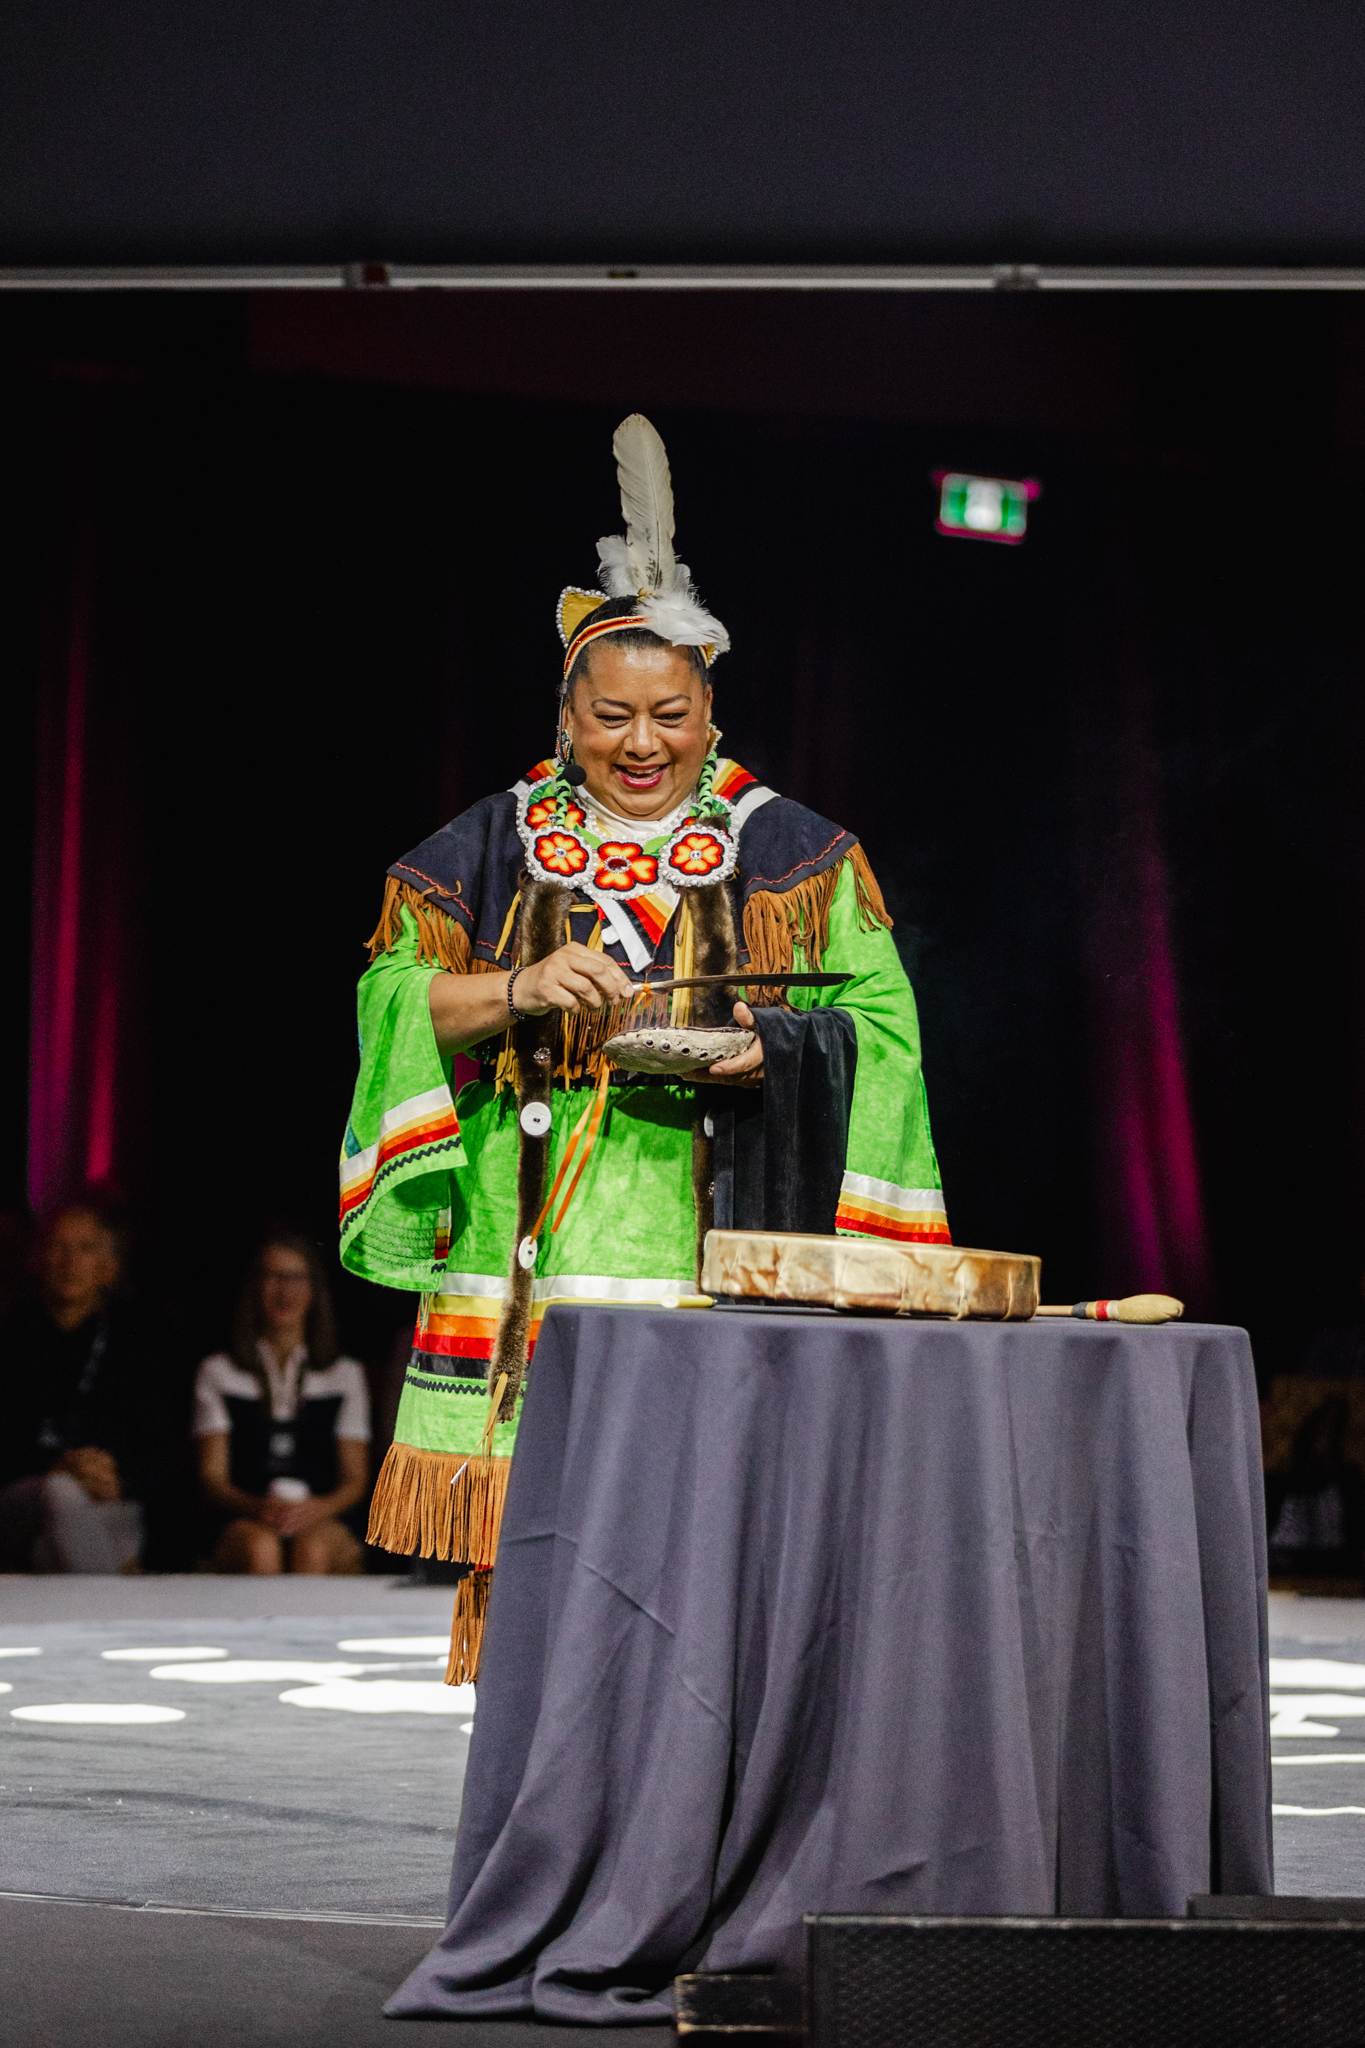 A man in a native outfit, captured in event photography, standing at a table.